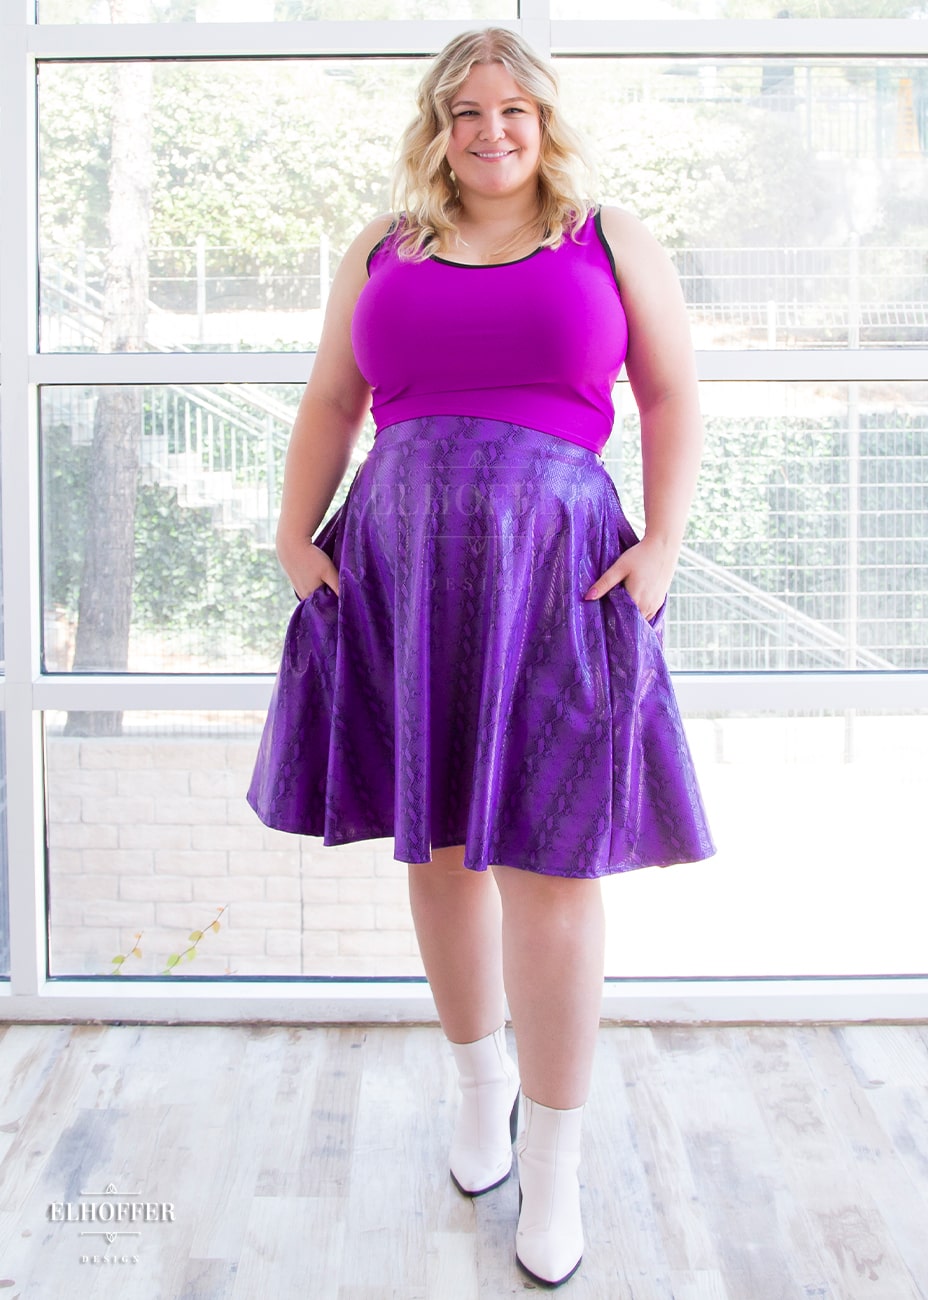 Sarah, a fair skinned size XL model with long blonde hair, wears a high-waisted knee length full skirt with a fitted matching waistband encased with elastic in our purple croki print. The purple croki print is a shiny bright purple snake skin pattern with vertical stripes. She has paired it with a bright magenta Buffy crop tank and white booties.